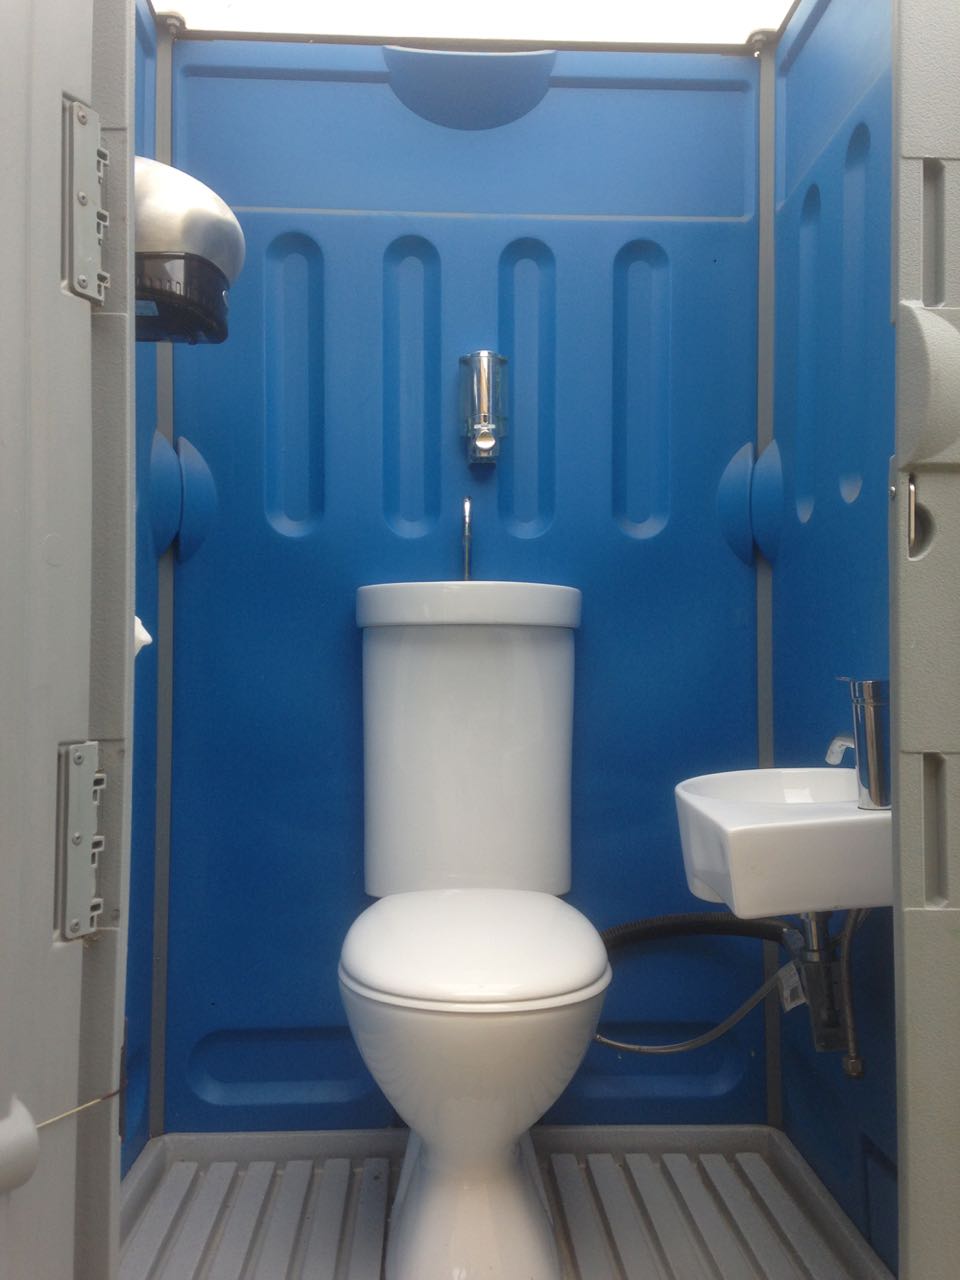 Stand Alone Showers & Toilets Ensuites To Suit